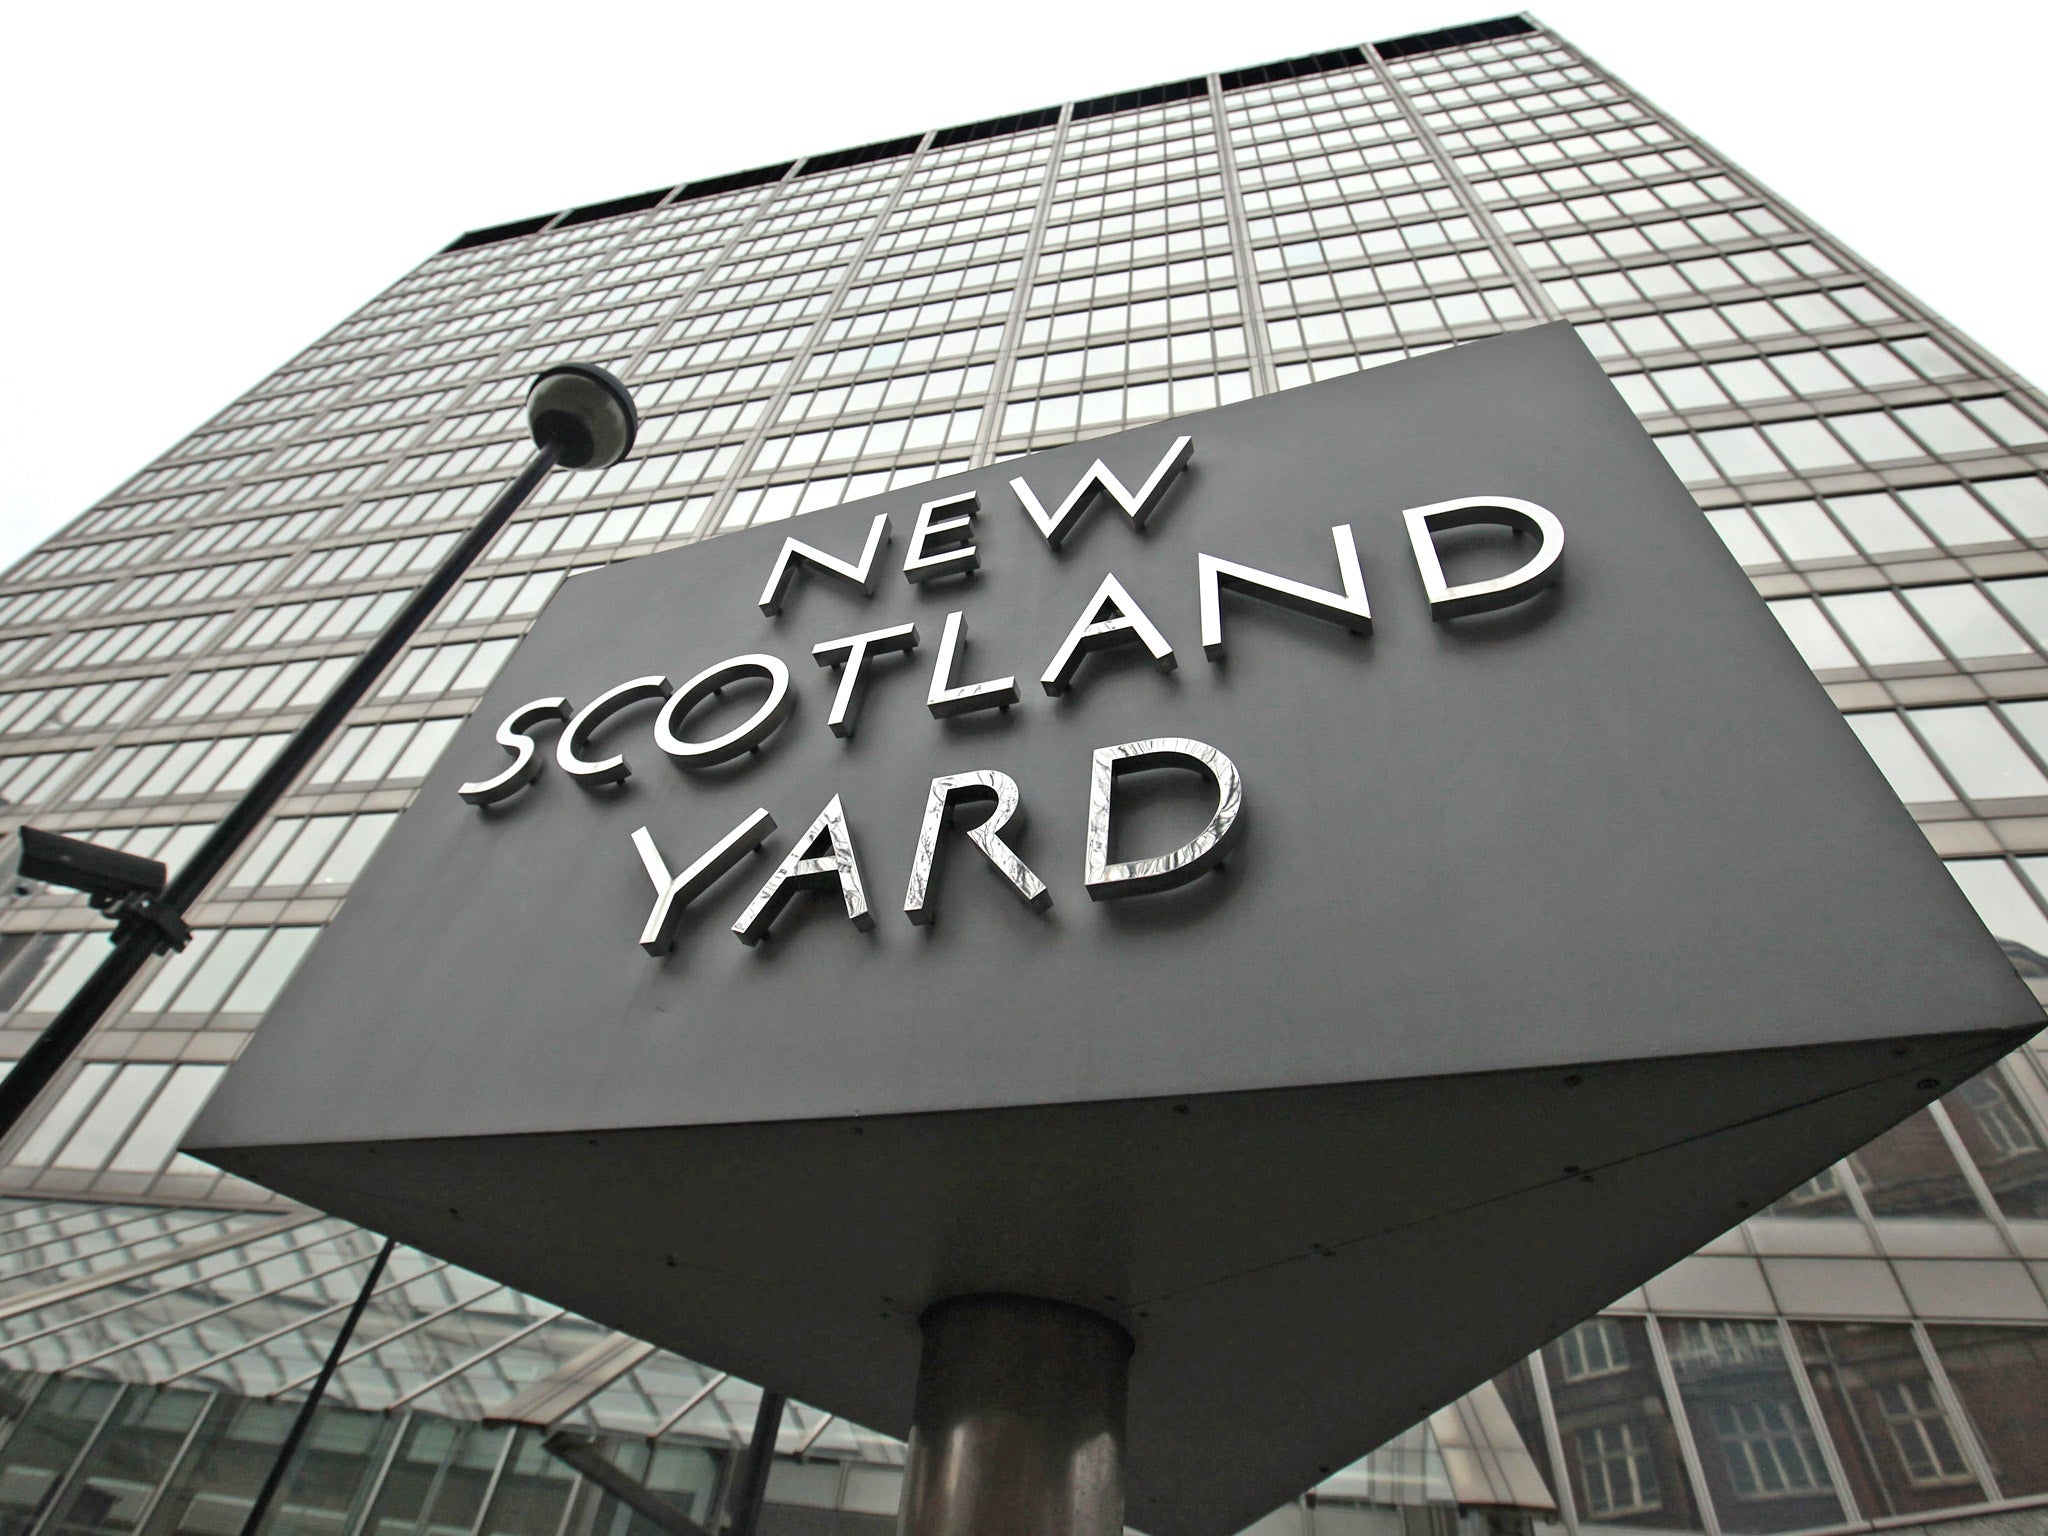 Metropolitan Police's child abuse investigation team have interviewed several adults who claim that they were sexually assaulted as children by MPs in a paedophile ring